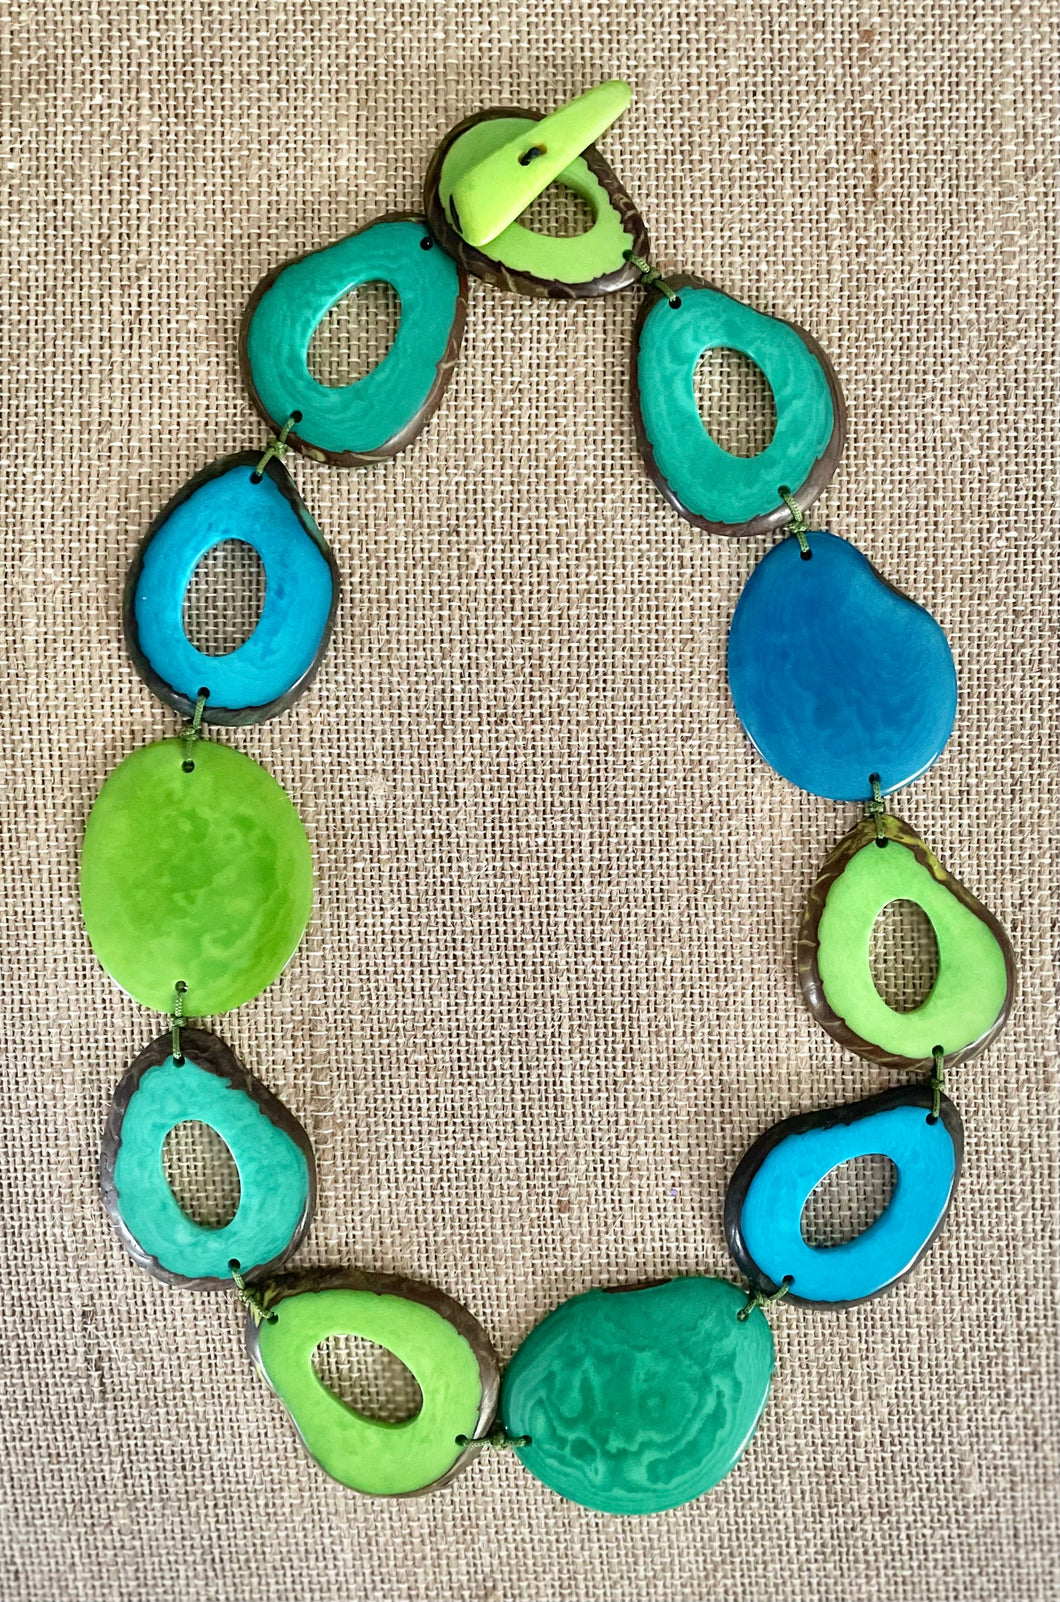 Green, Turquoise and Teal Tagua Necklace are